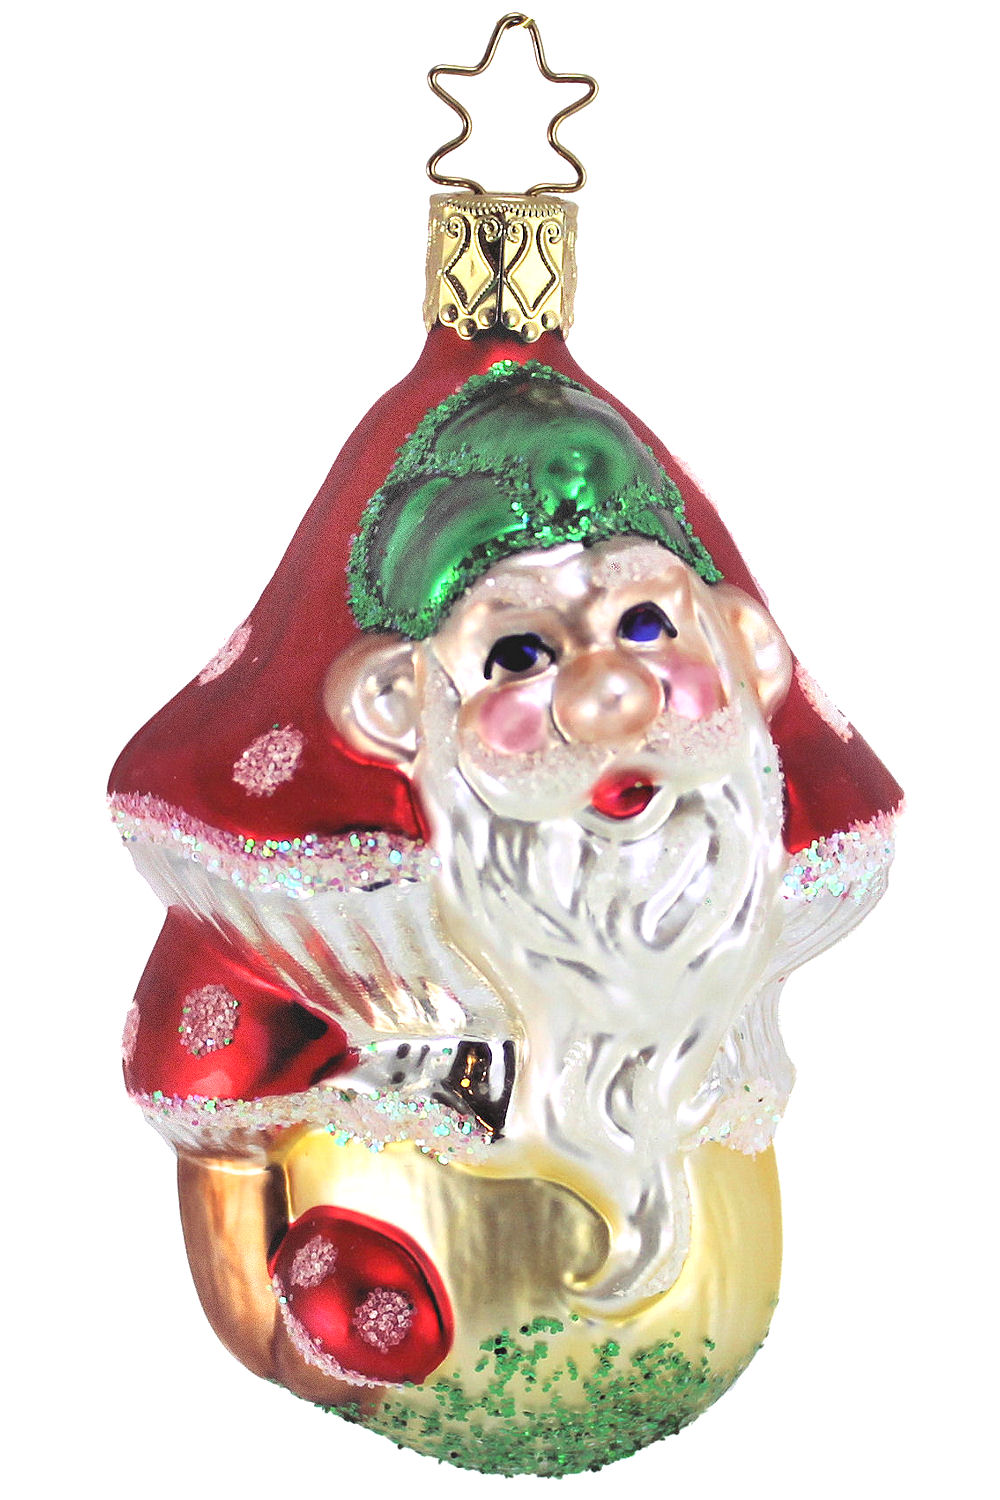 Details about   Inge's Christmas Heirlooms Touched By Luck Elf Glass Christmas Ornament Germany 